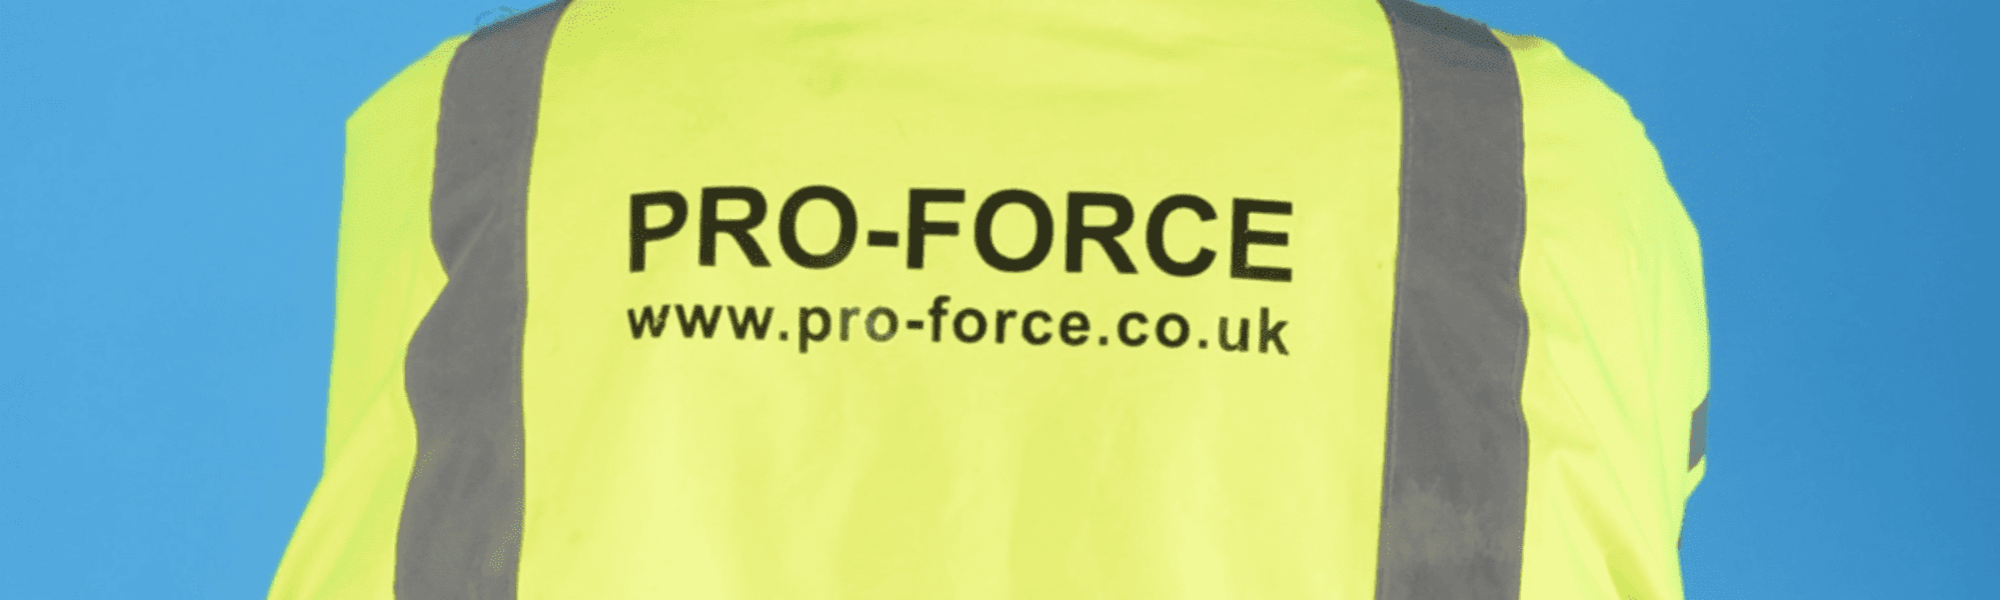 Pro-Force Footer